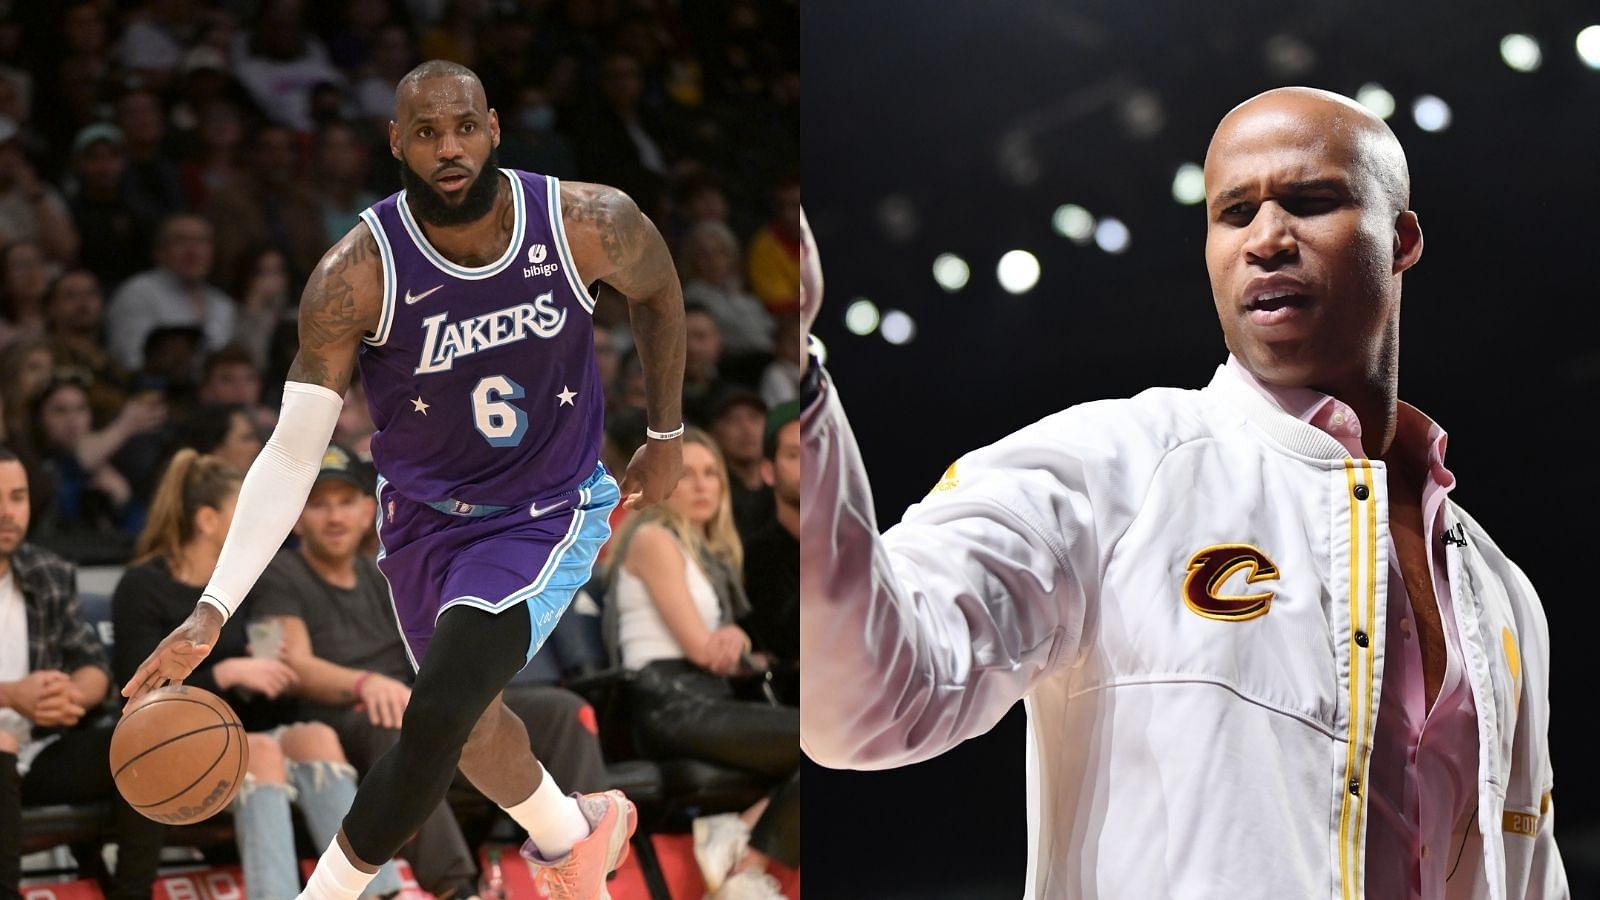 "LeBron James is the MOST SELFISH SUPERSTAR": Richard Jefferson hilariously roasts Lakers superstar's overly animated and self-serving celebrations